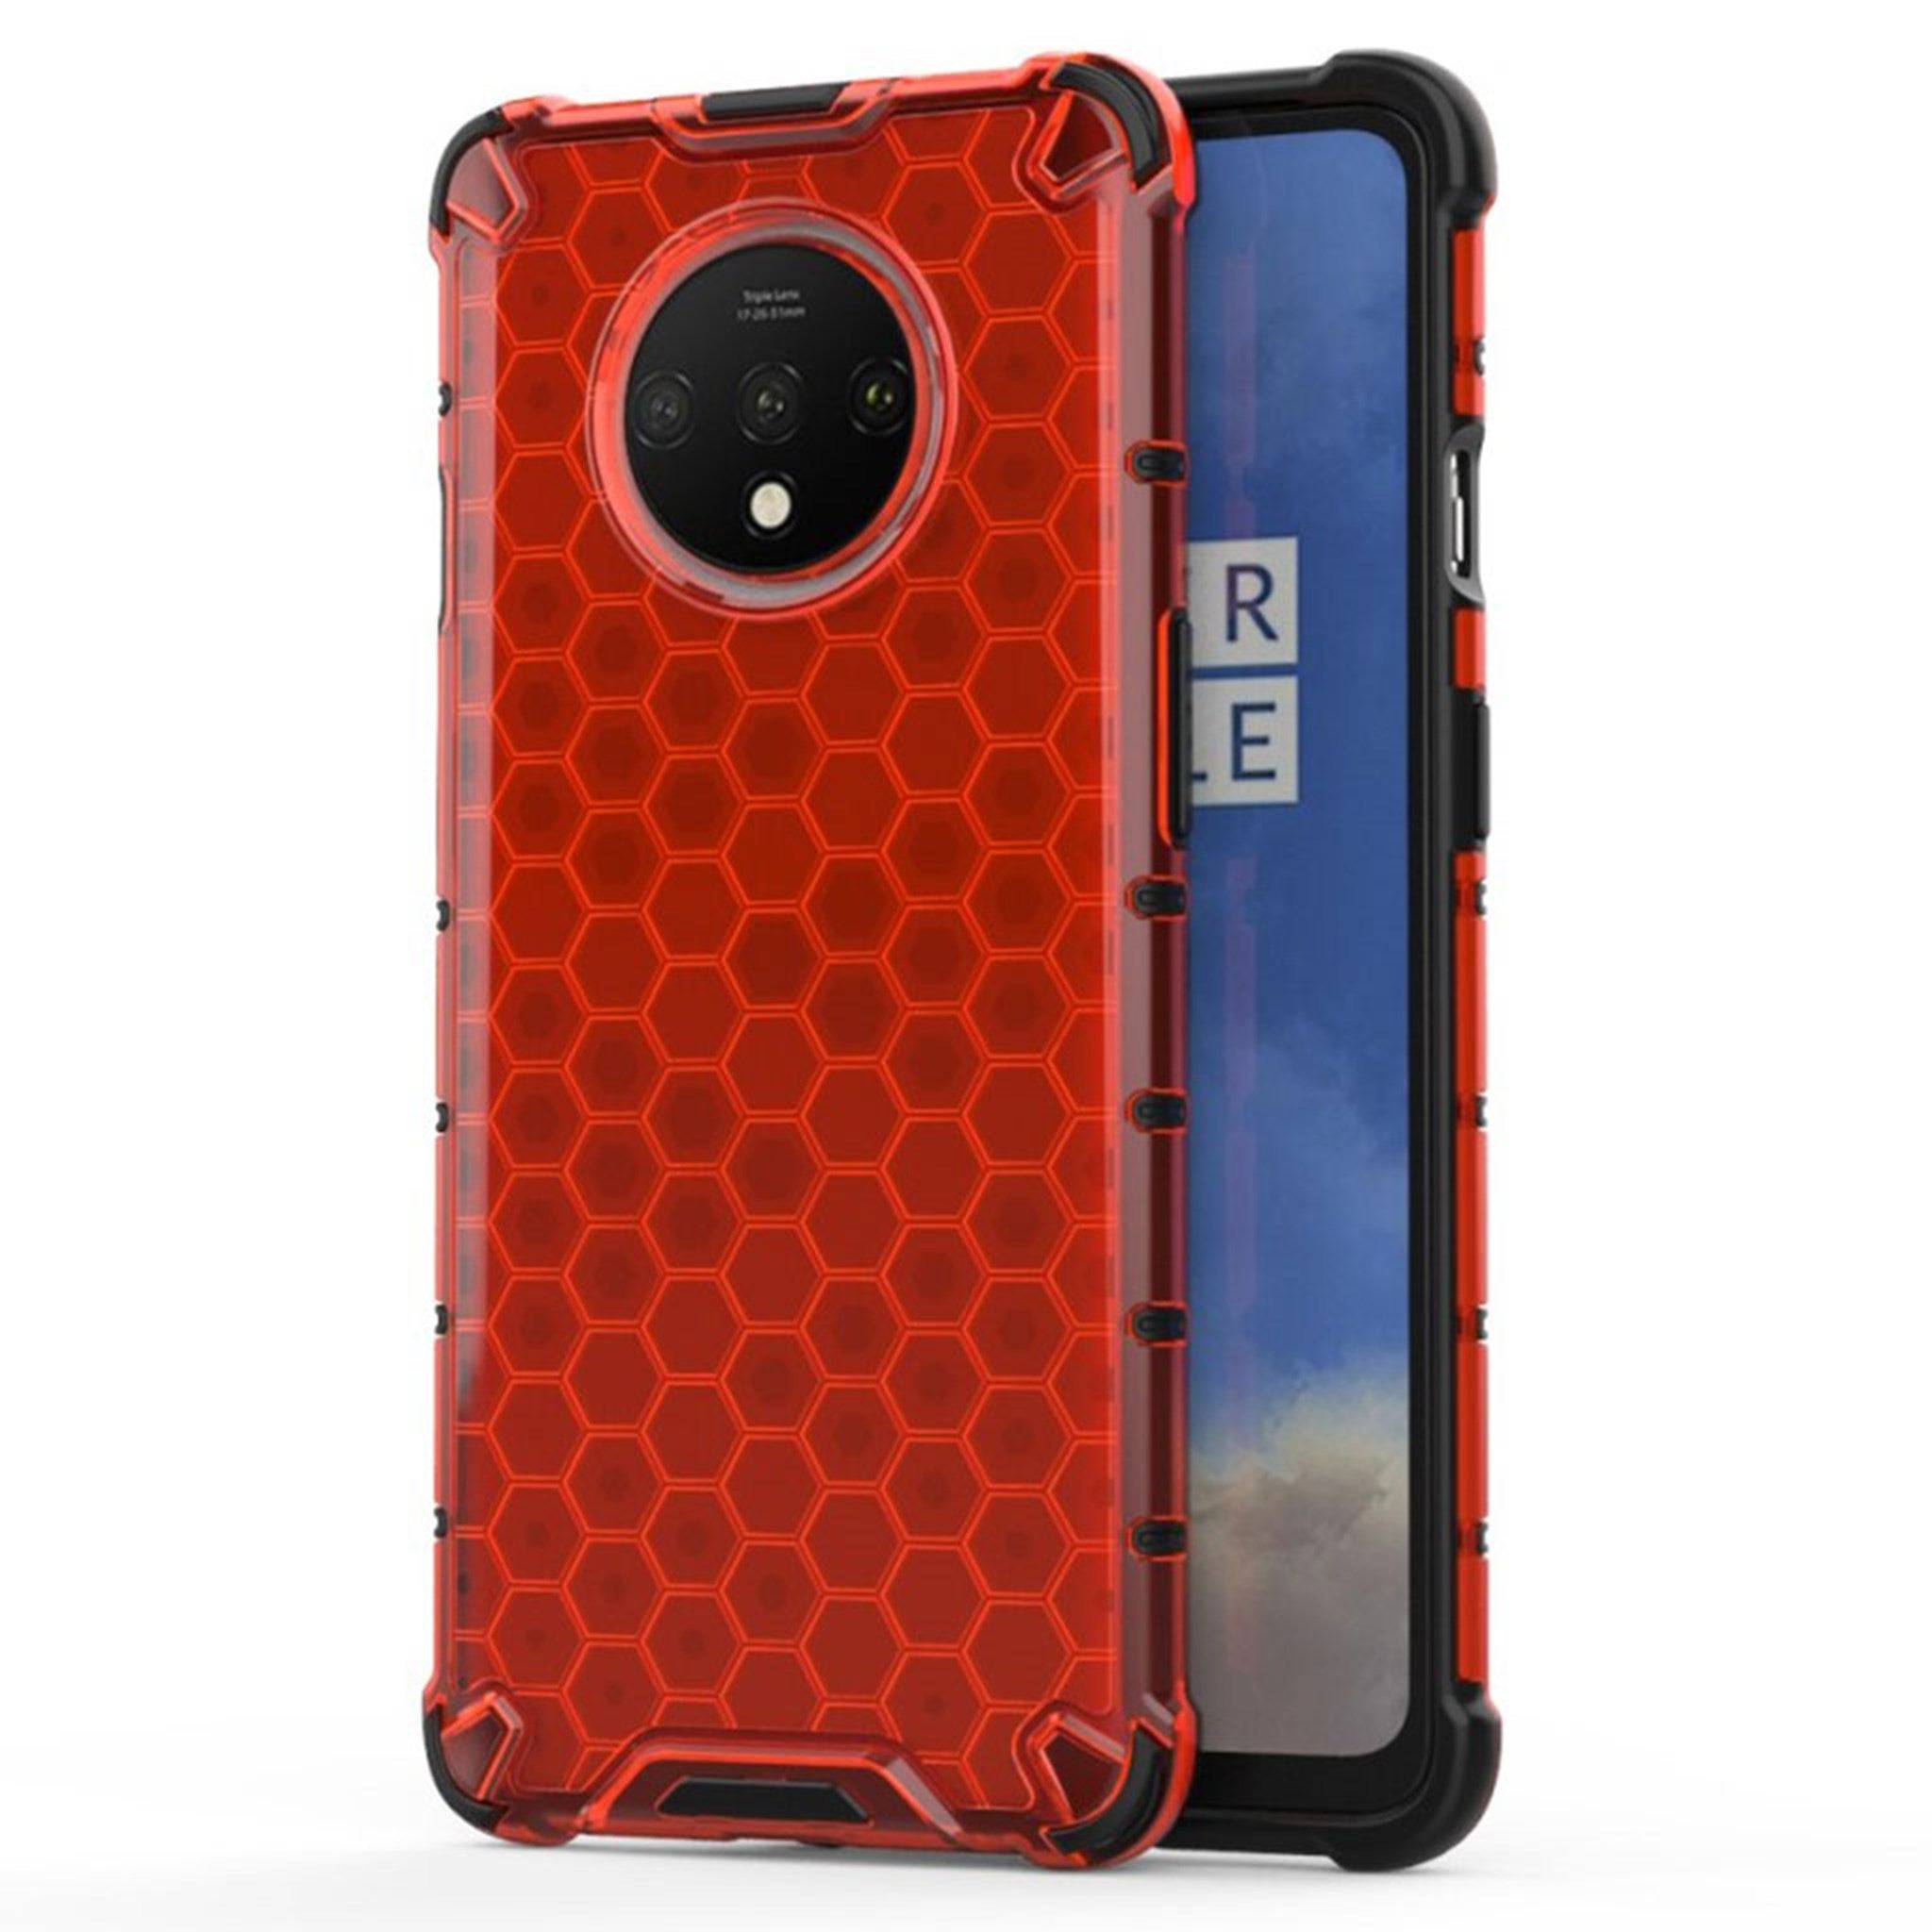 Bofink Honeycomb OnePlus 7T case - Red